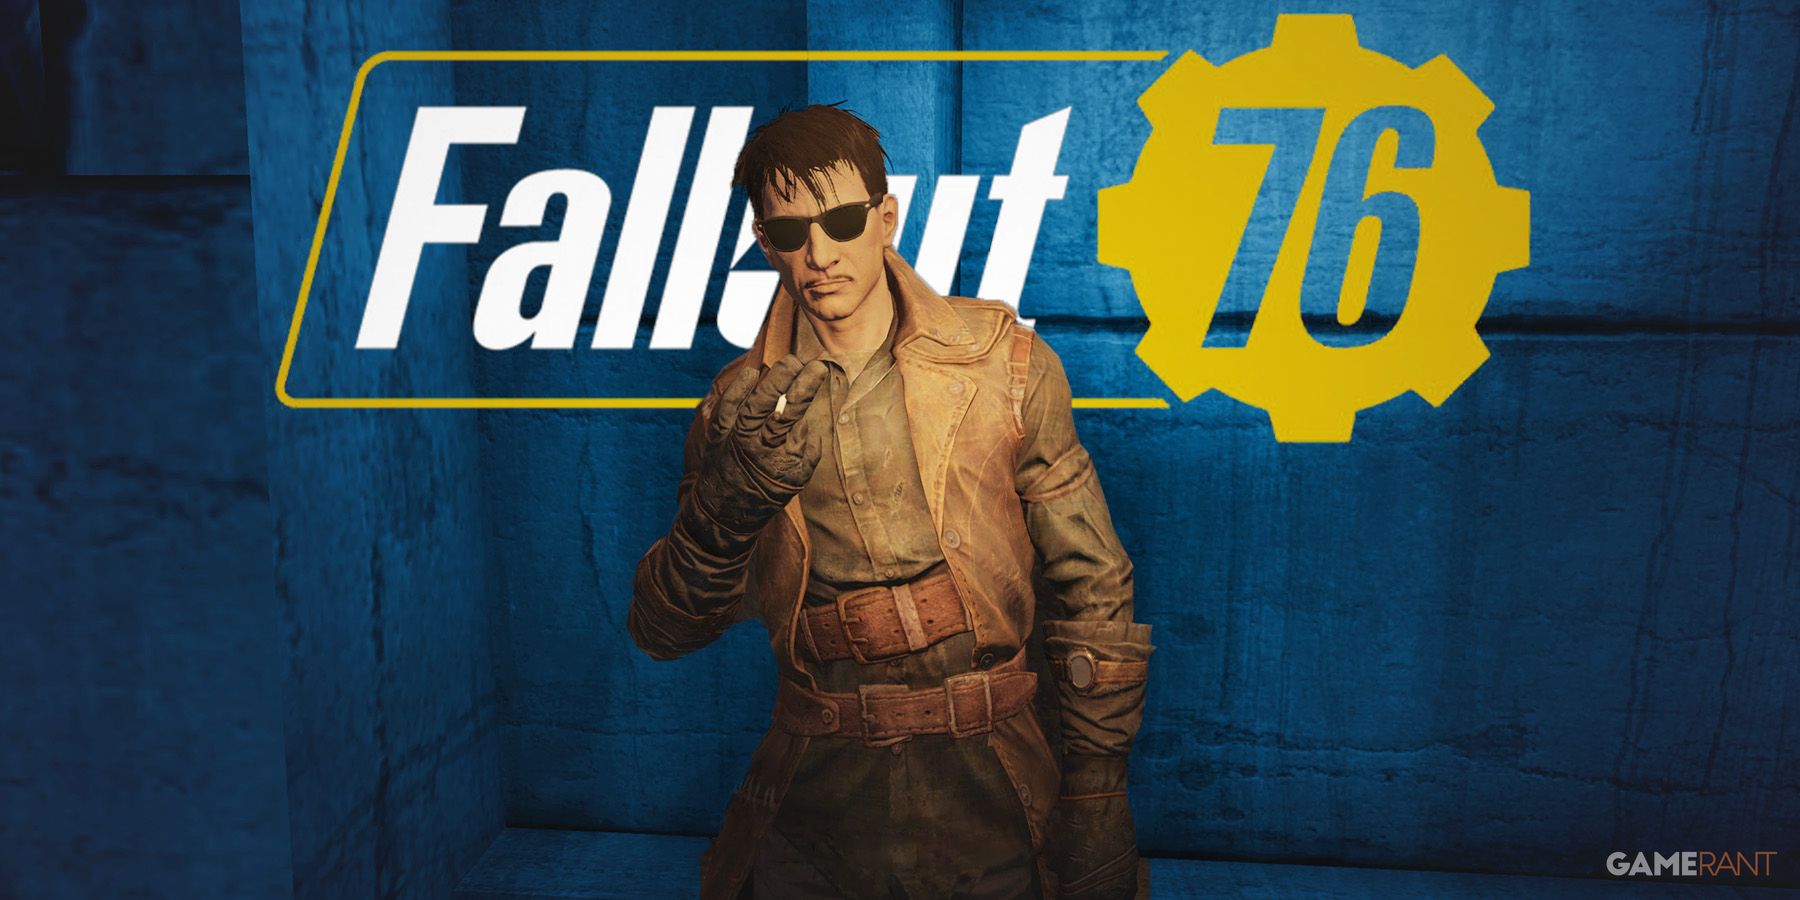 Fallout 76 Union Saboteur The Pitt smoking in front of F76 white and yellow logo blue background swap